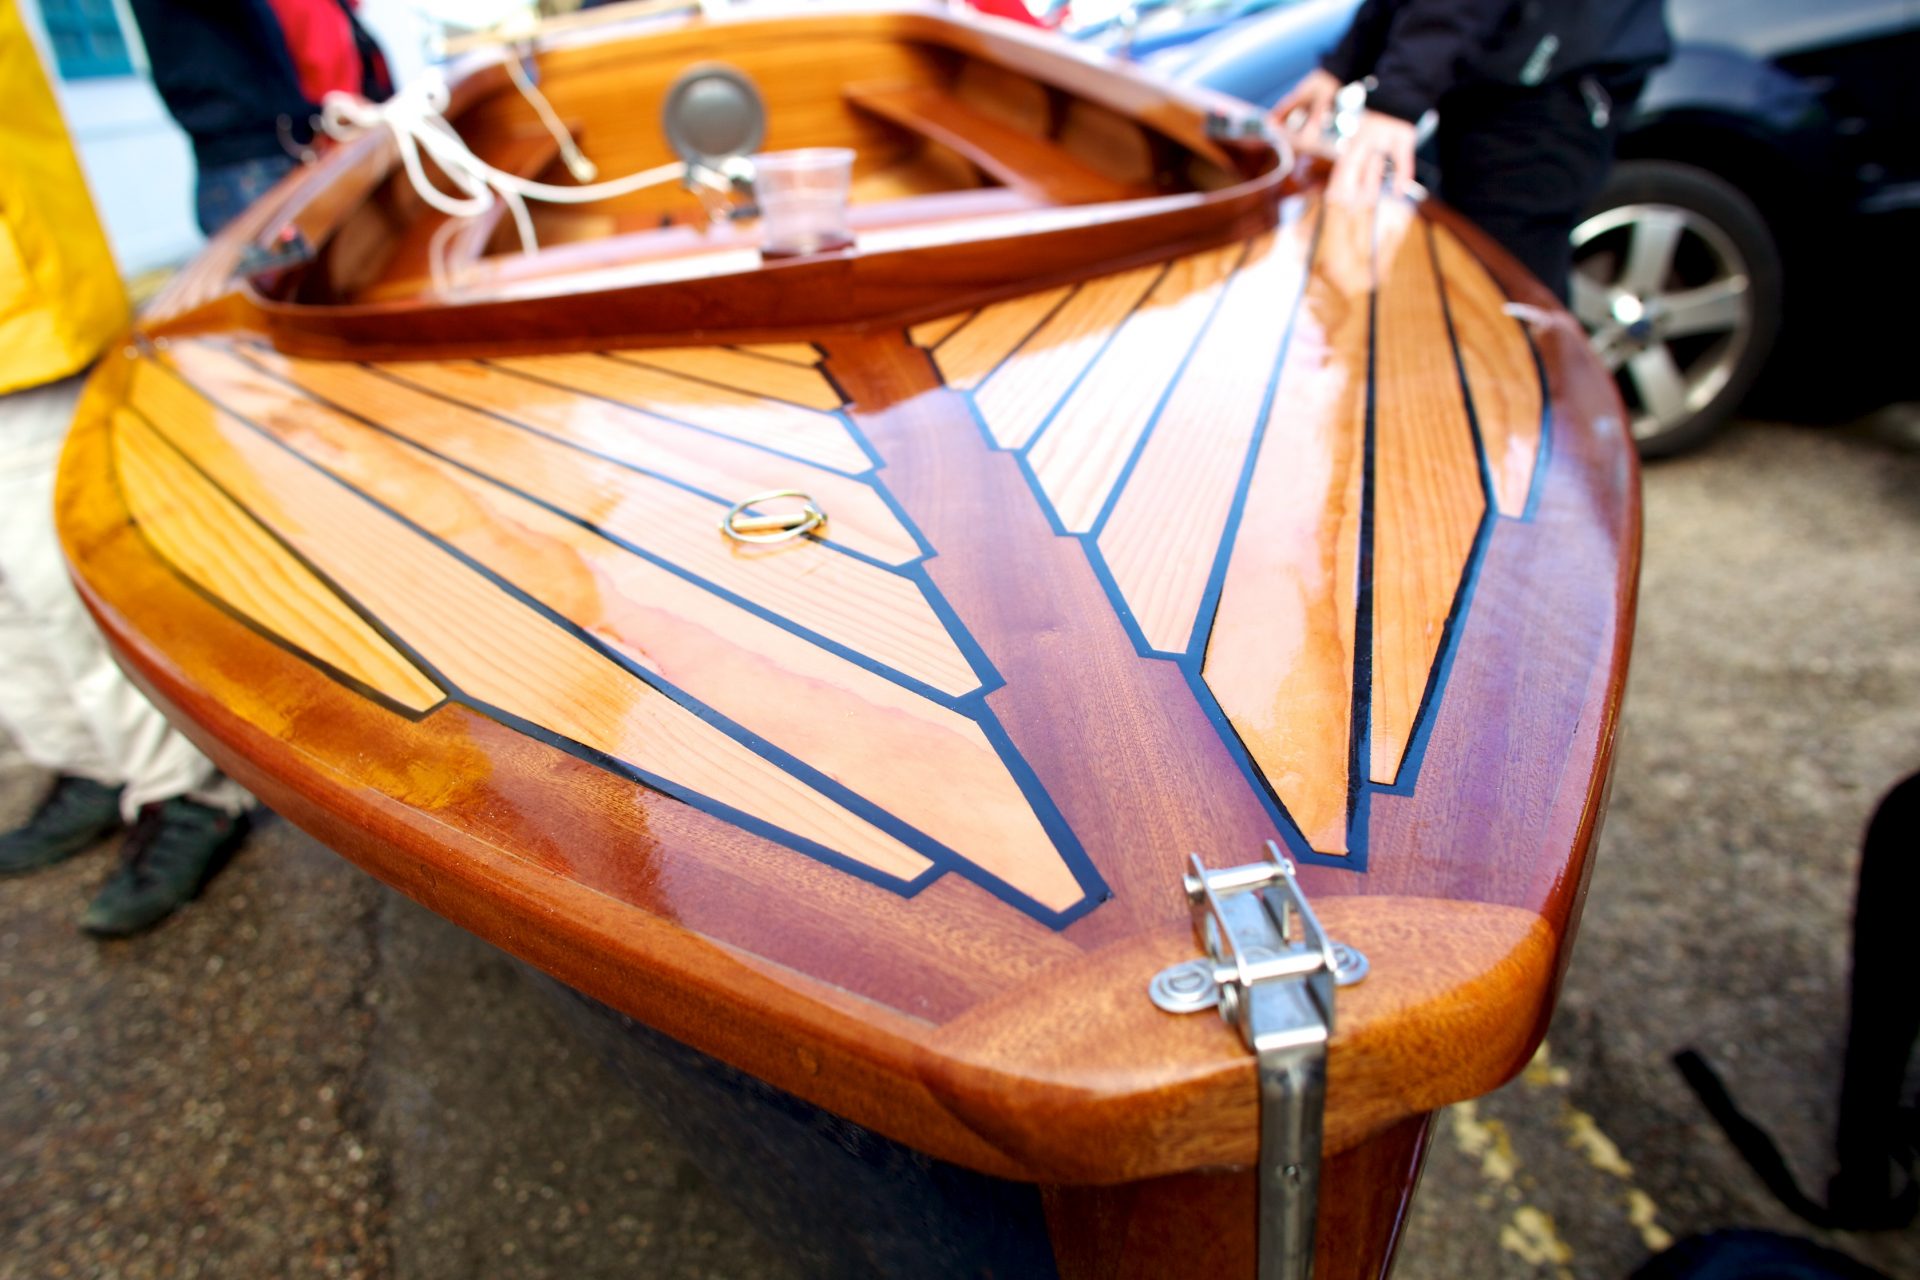  strip-planked version of Iain Oughtred’s Gannet sailing dinghy